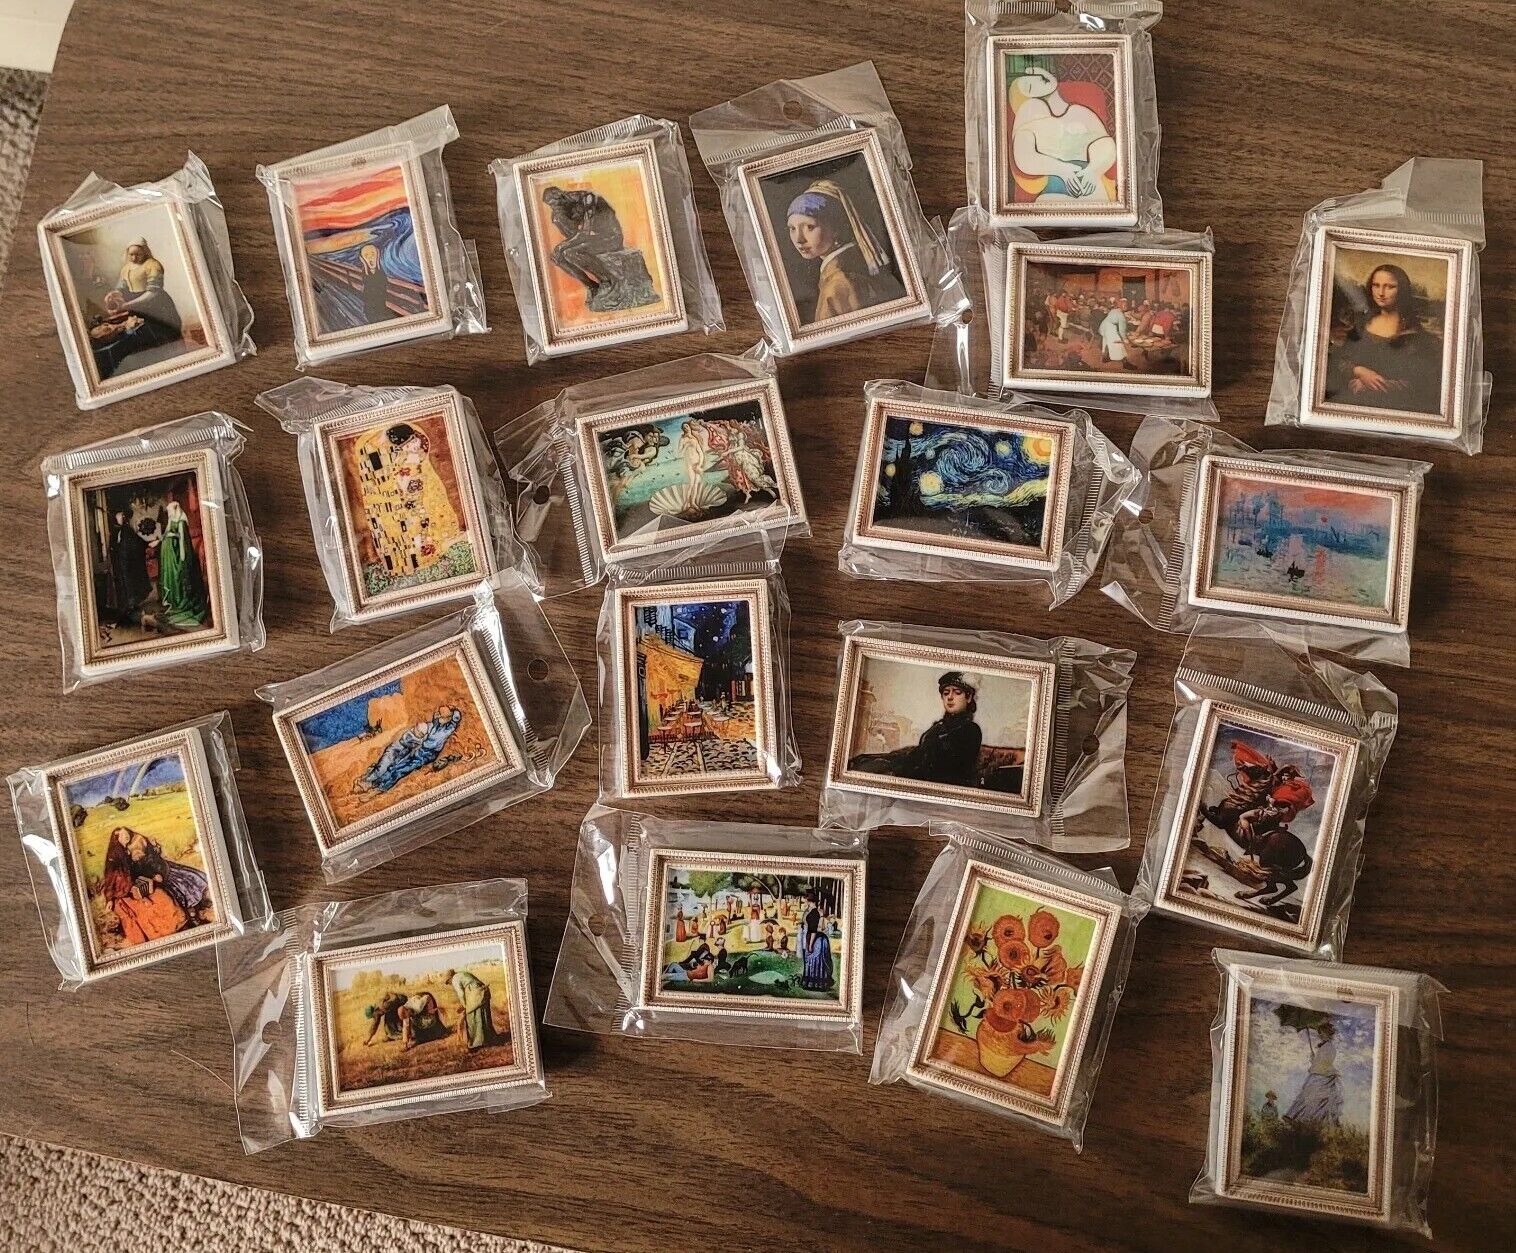 New In Package Masterpiece Paintings Magnets Lot Of 21 magnets total